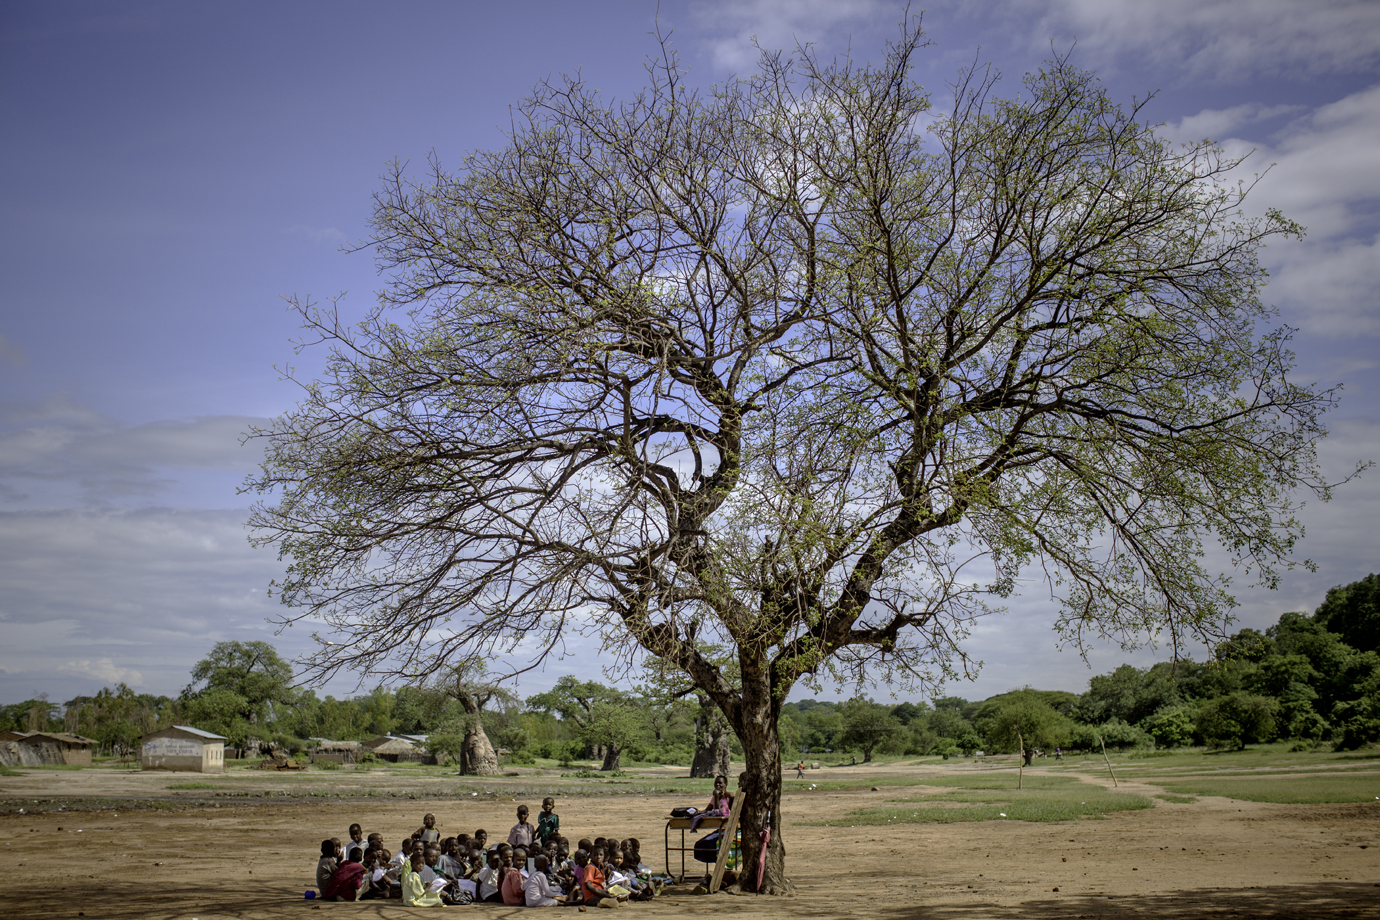  Students conducts their teaching in the shadow of a tree / Malawi - 2016 